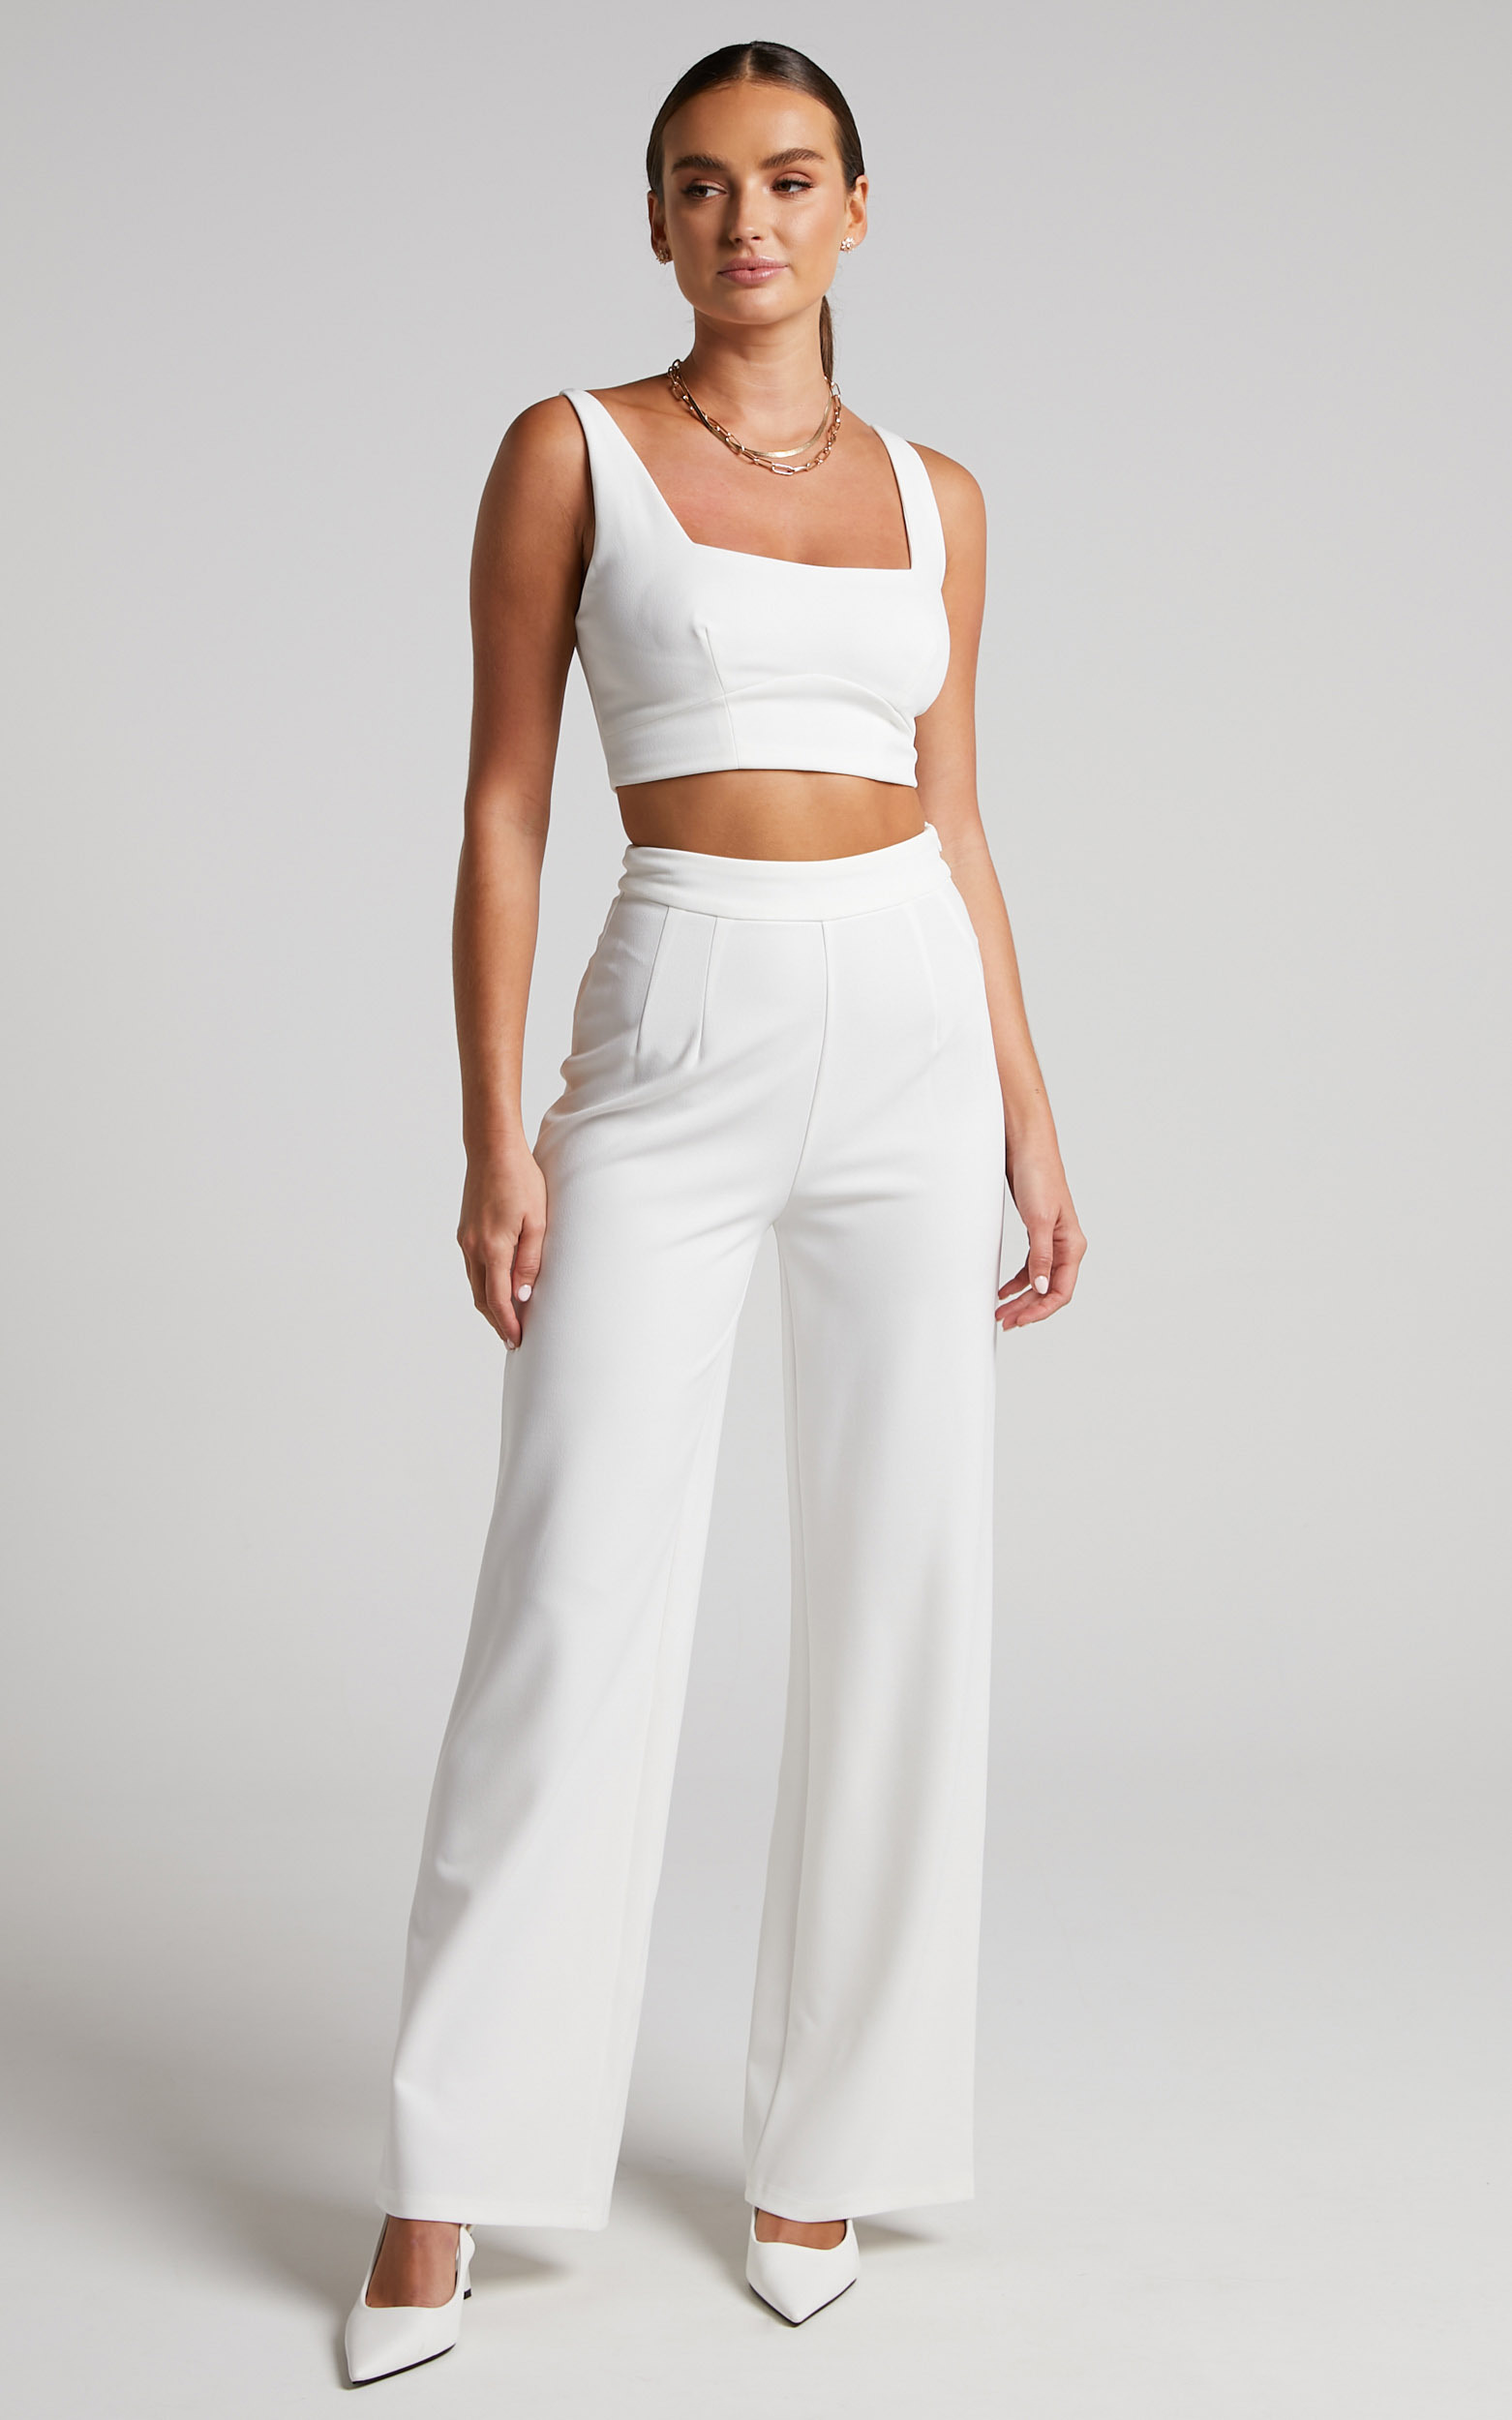 Elibeth Two Piece Set - Crop Top and High Waisted Wide Leg Pants in White - 06, WHT1, hi-res image number null